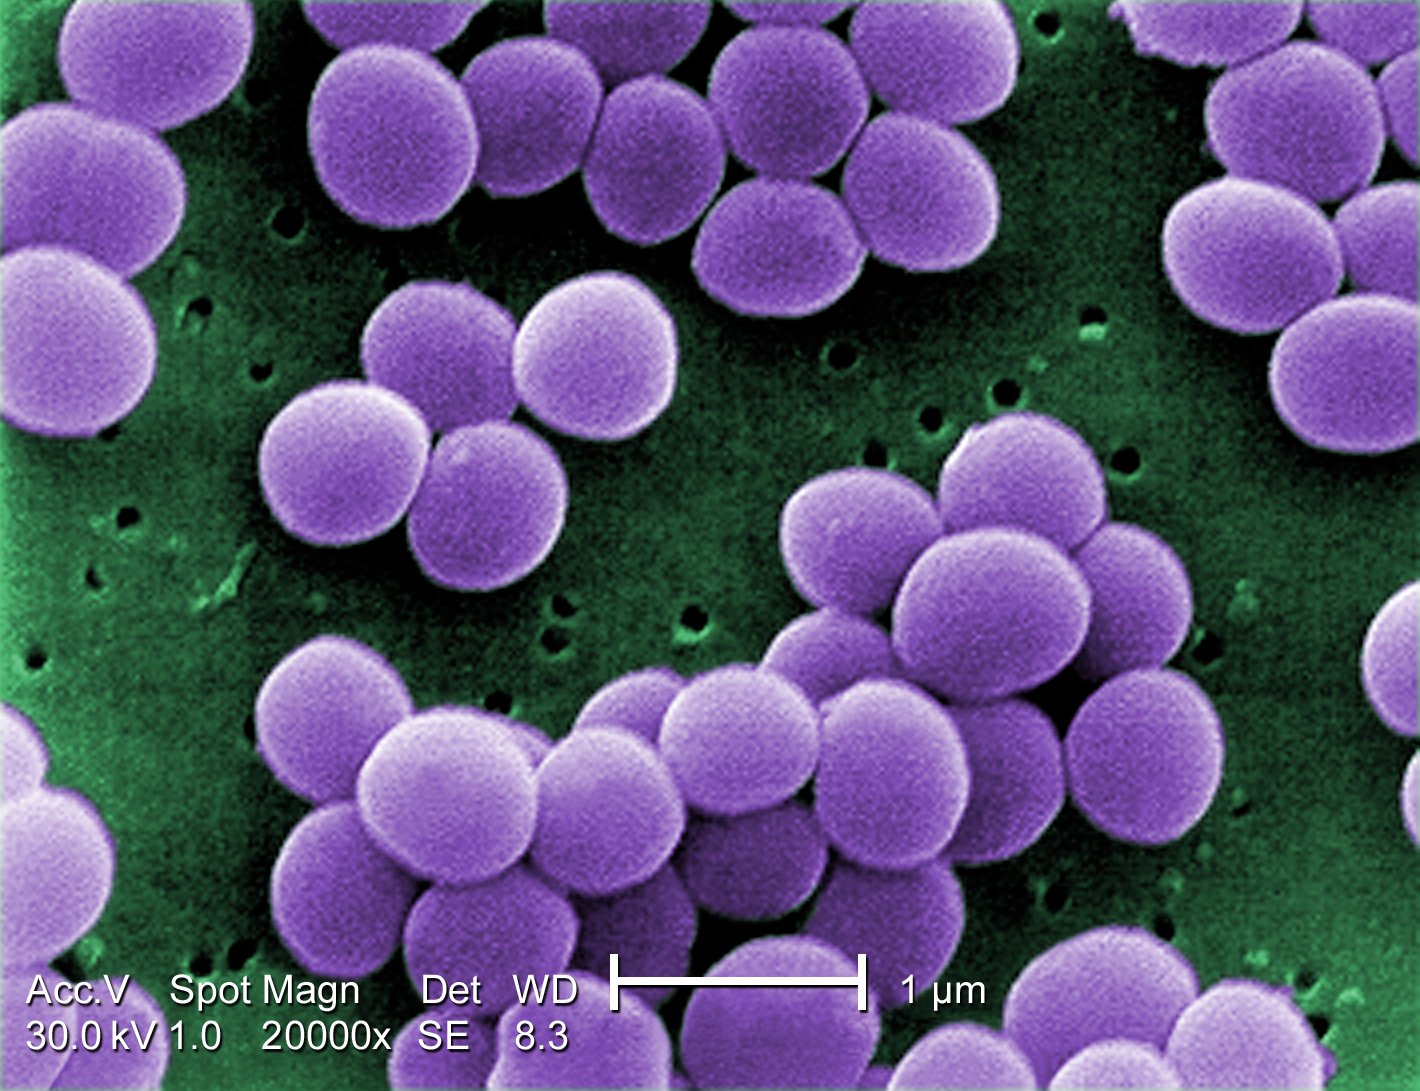 Scanning electron micrograph of <i>Staphylococcus aureus</i> showing staphylococcus arrangements.